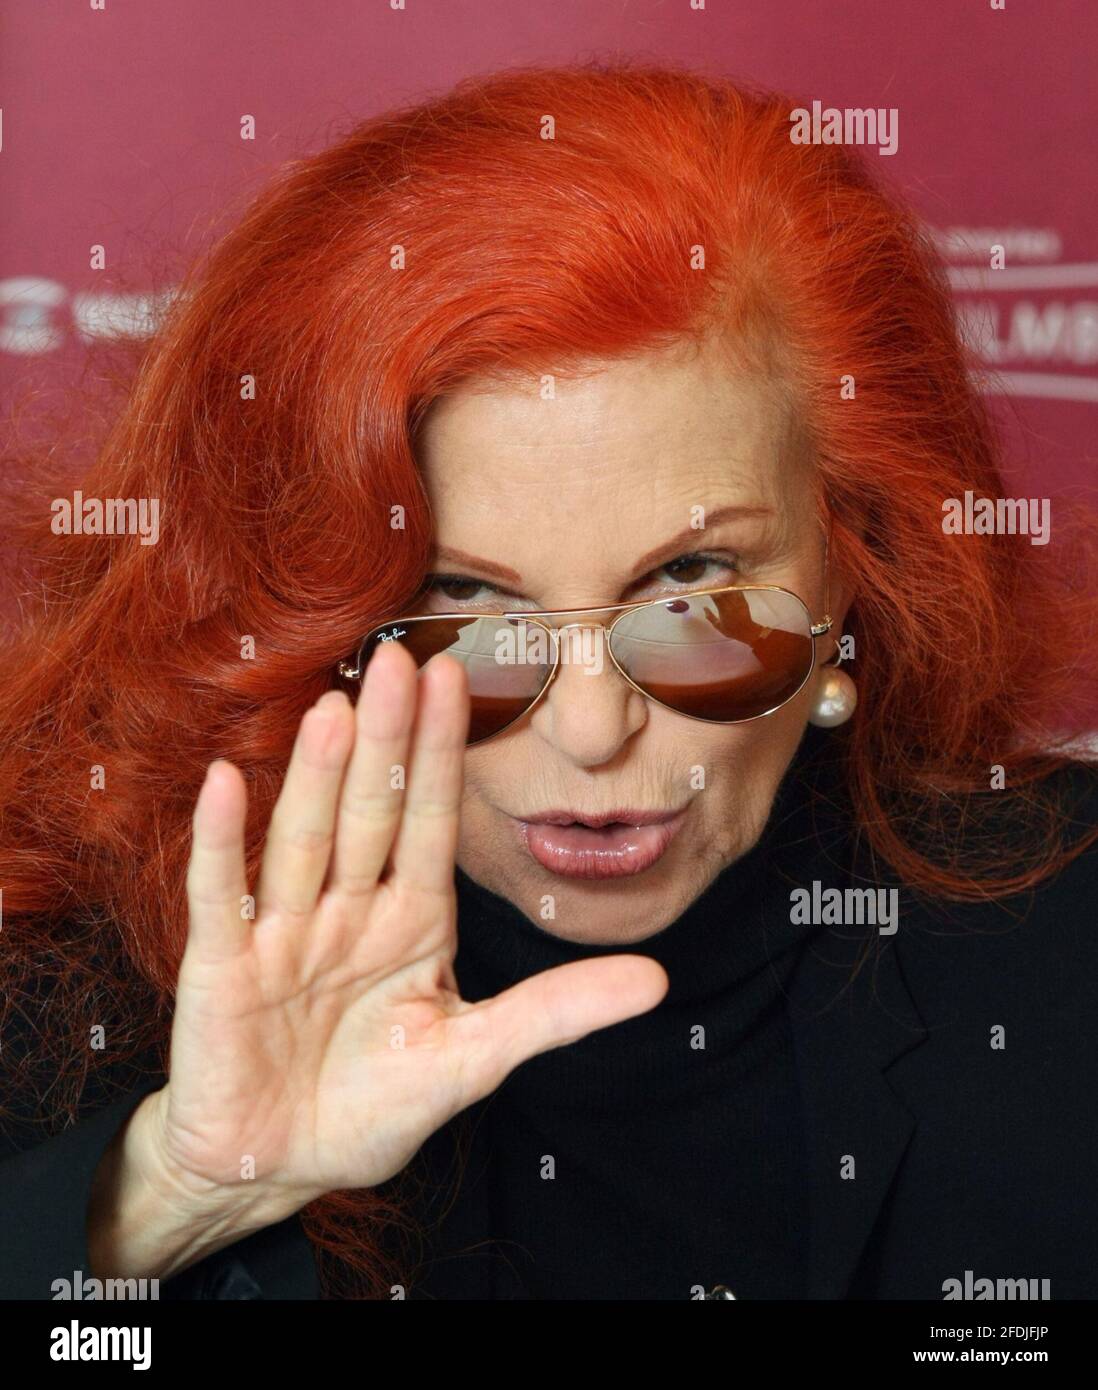 Berlin, Germany. 13th Feb, 2008. Italian singer Milva speaks during a press conference at the Berlinale. Italian pop and chanson singer Milva is dead. This was confirmed by her daughter to the Italian news agency Ansa on Saturday. Credit: Soeren Stache/dpa-Zentralbild/dpa/Alamy Live News Stock Photo